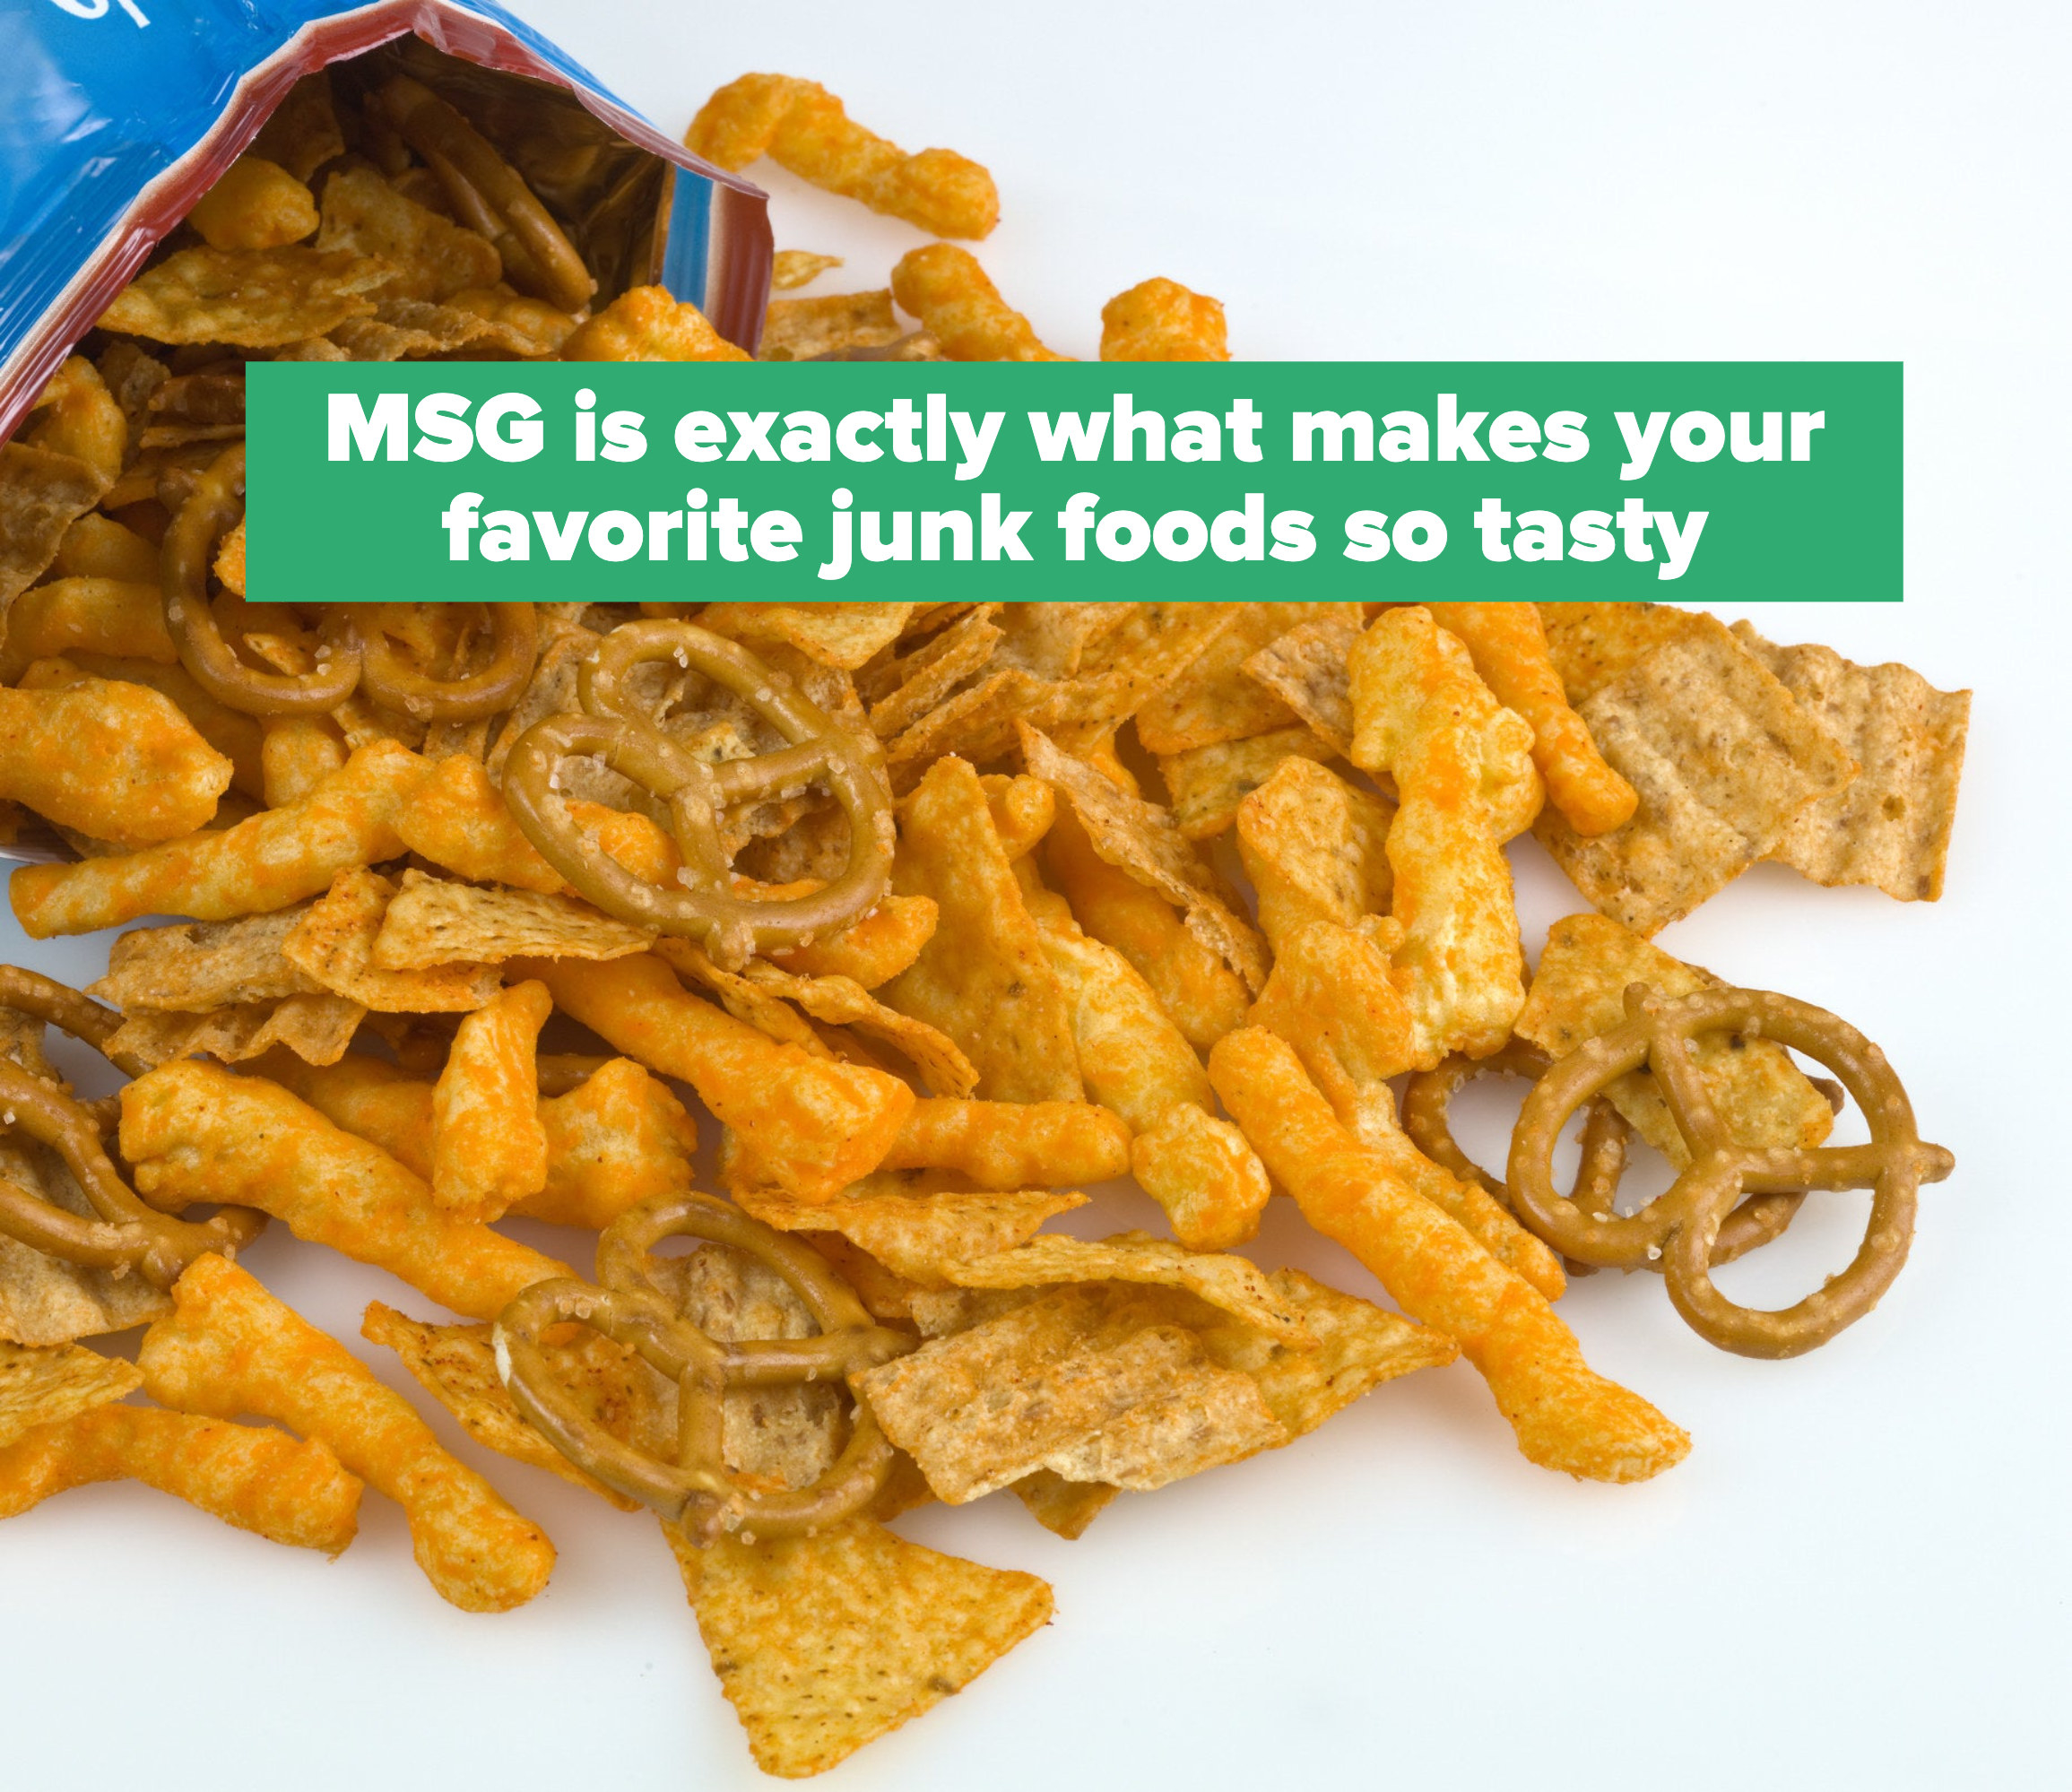 A bag of party snack mix.